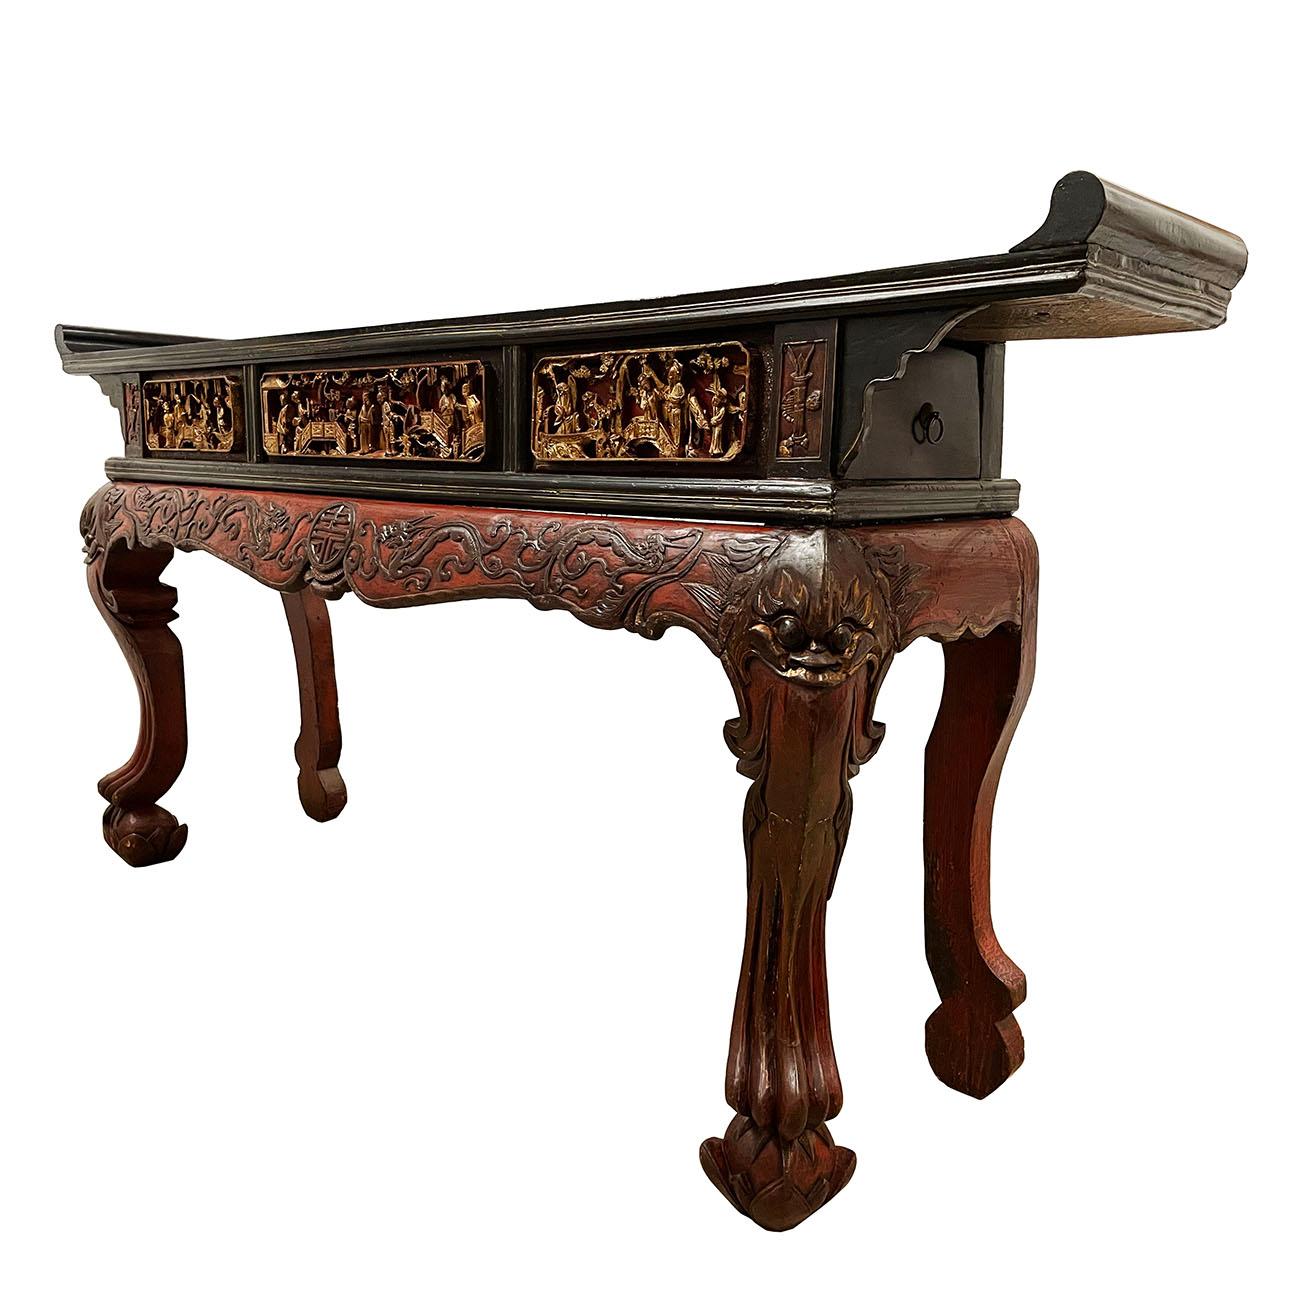 Size: 42in H x 88in W x 18in D
Drawer: 5.5in H x 8in W x 29in D each
Origin: Zhejiang, China
circa: 1890 - 1910
Material: Wood
Condition: Solid wood construction, very heavy and sturdy, deep carved spandrels. Minor blemishes due to age
Look at